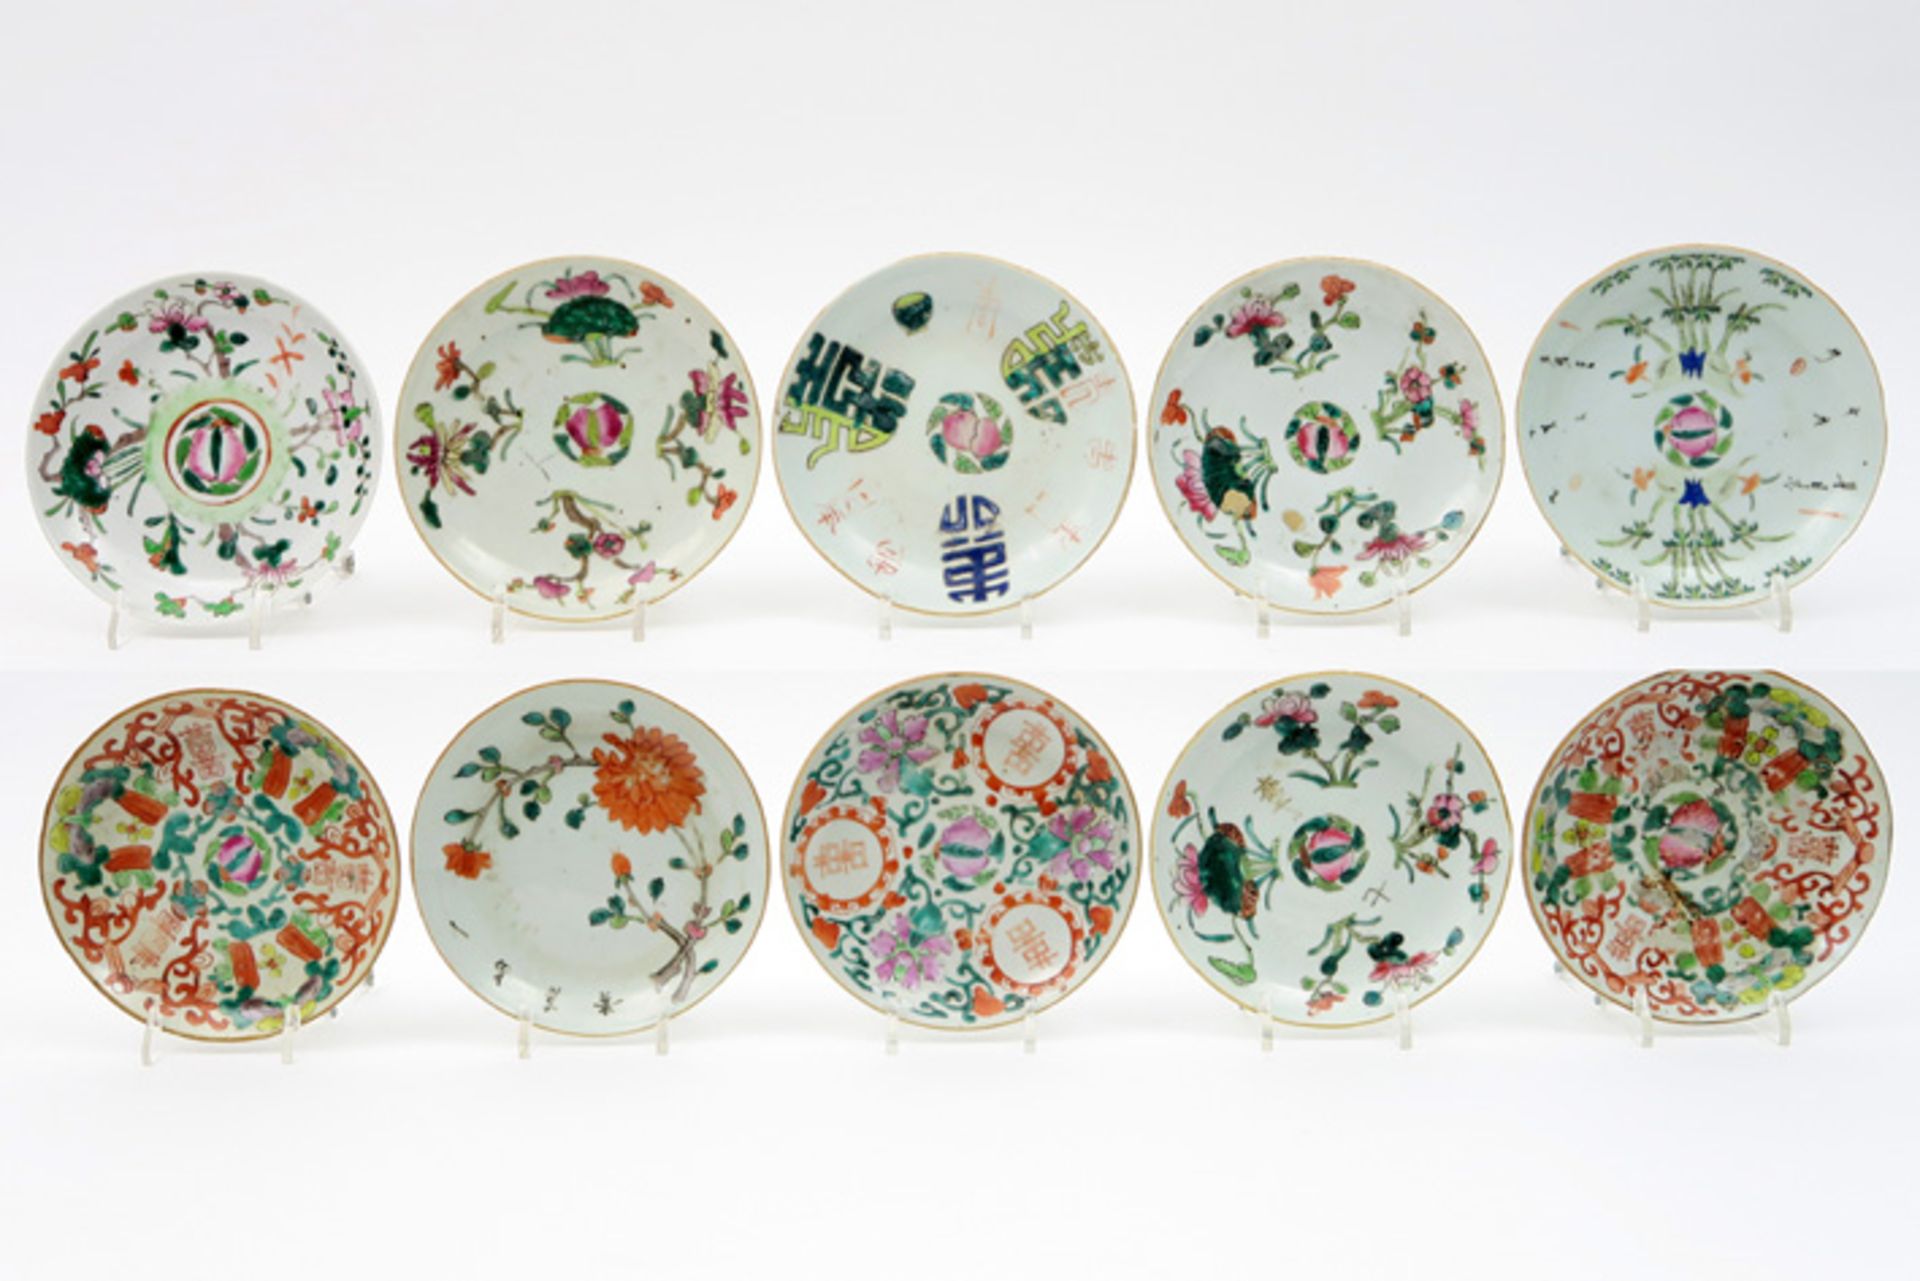 ten small Chinese plates in porcelain with a polychrome decor Lot van tien Chinese bordjes in